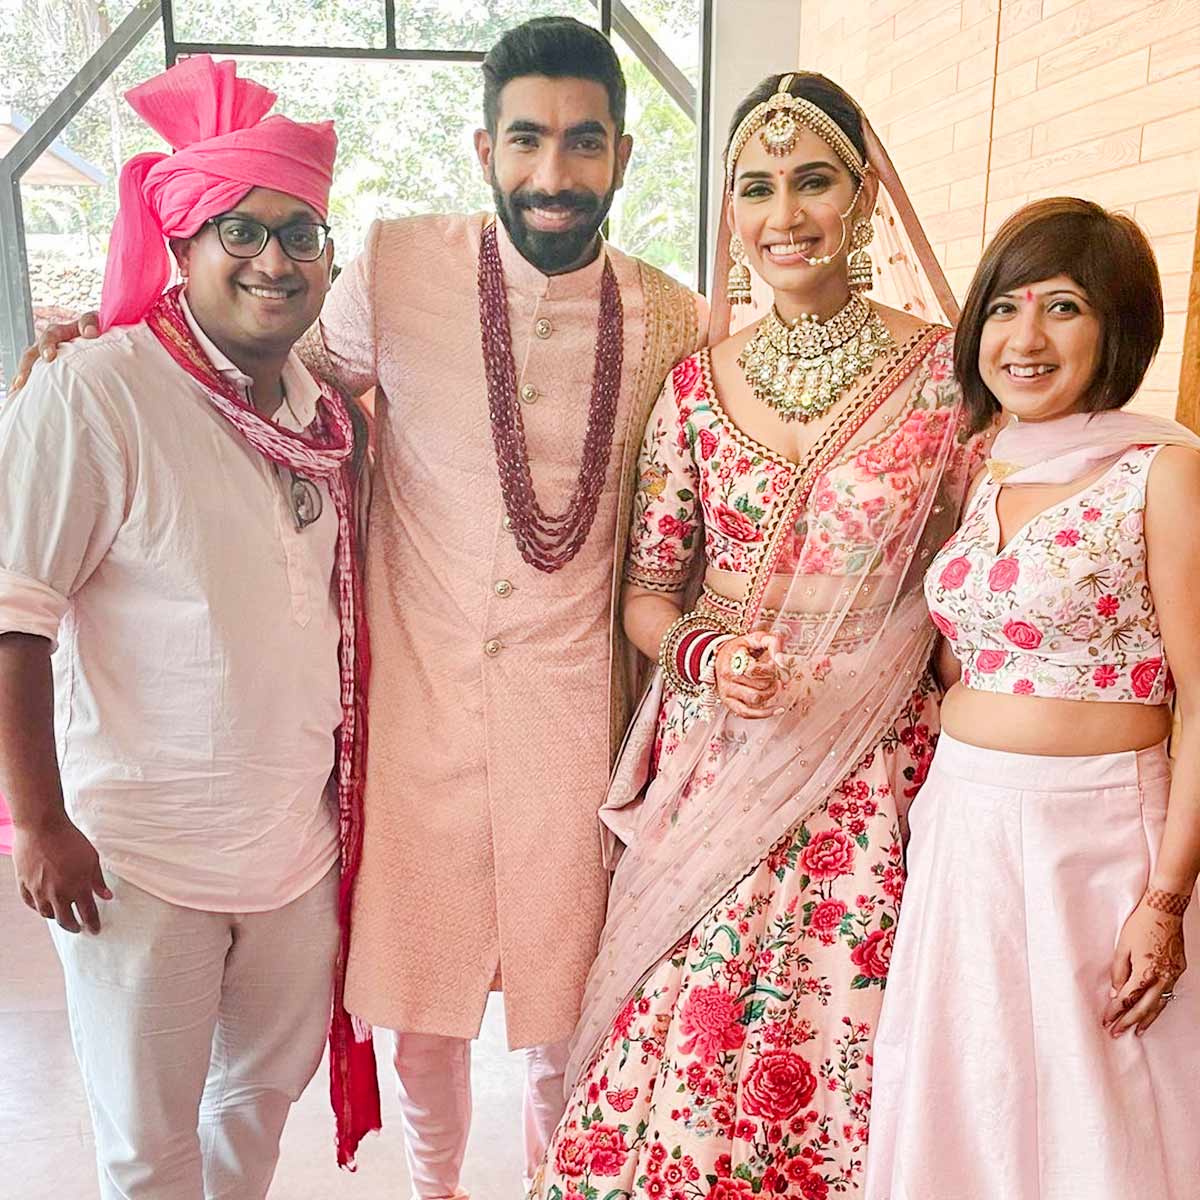 Jasprit, welcome to the family!' - Rediff.com Get Ahead